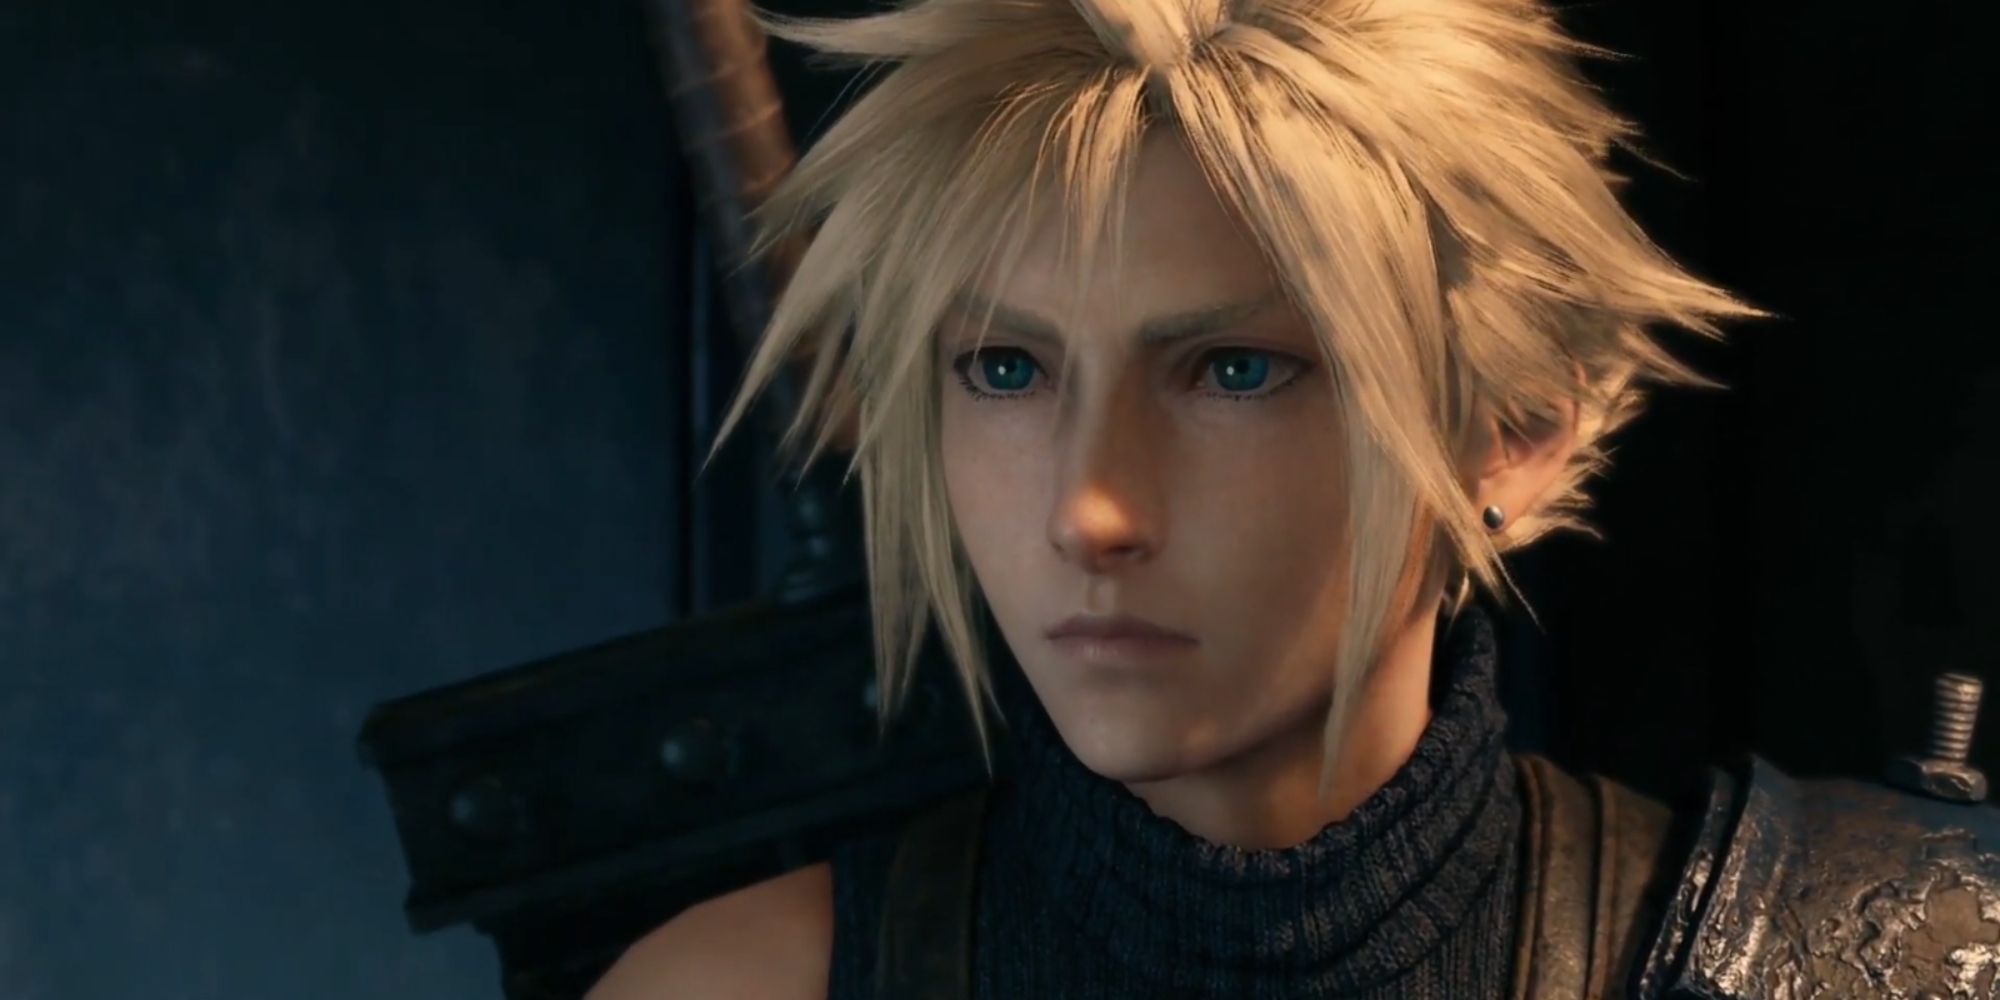 Final Fantasy 7 Remake's straight-faced Cloud Strife